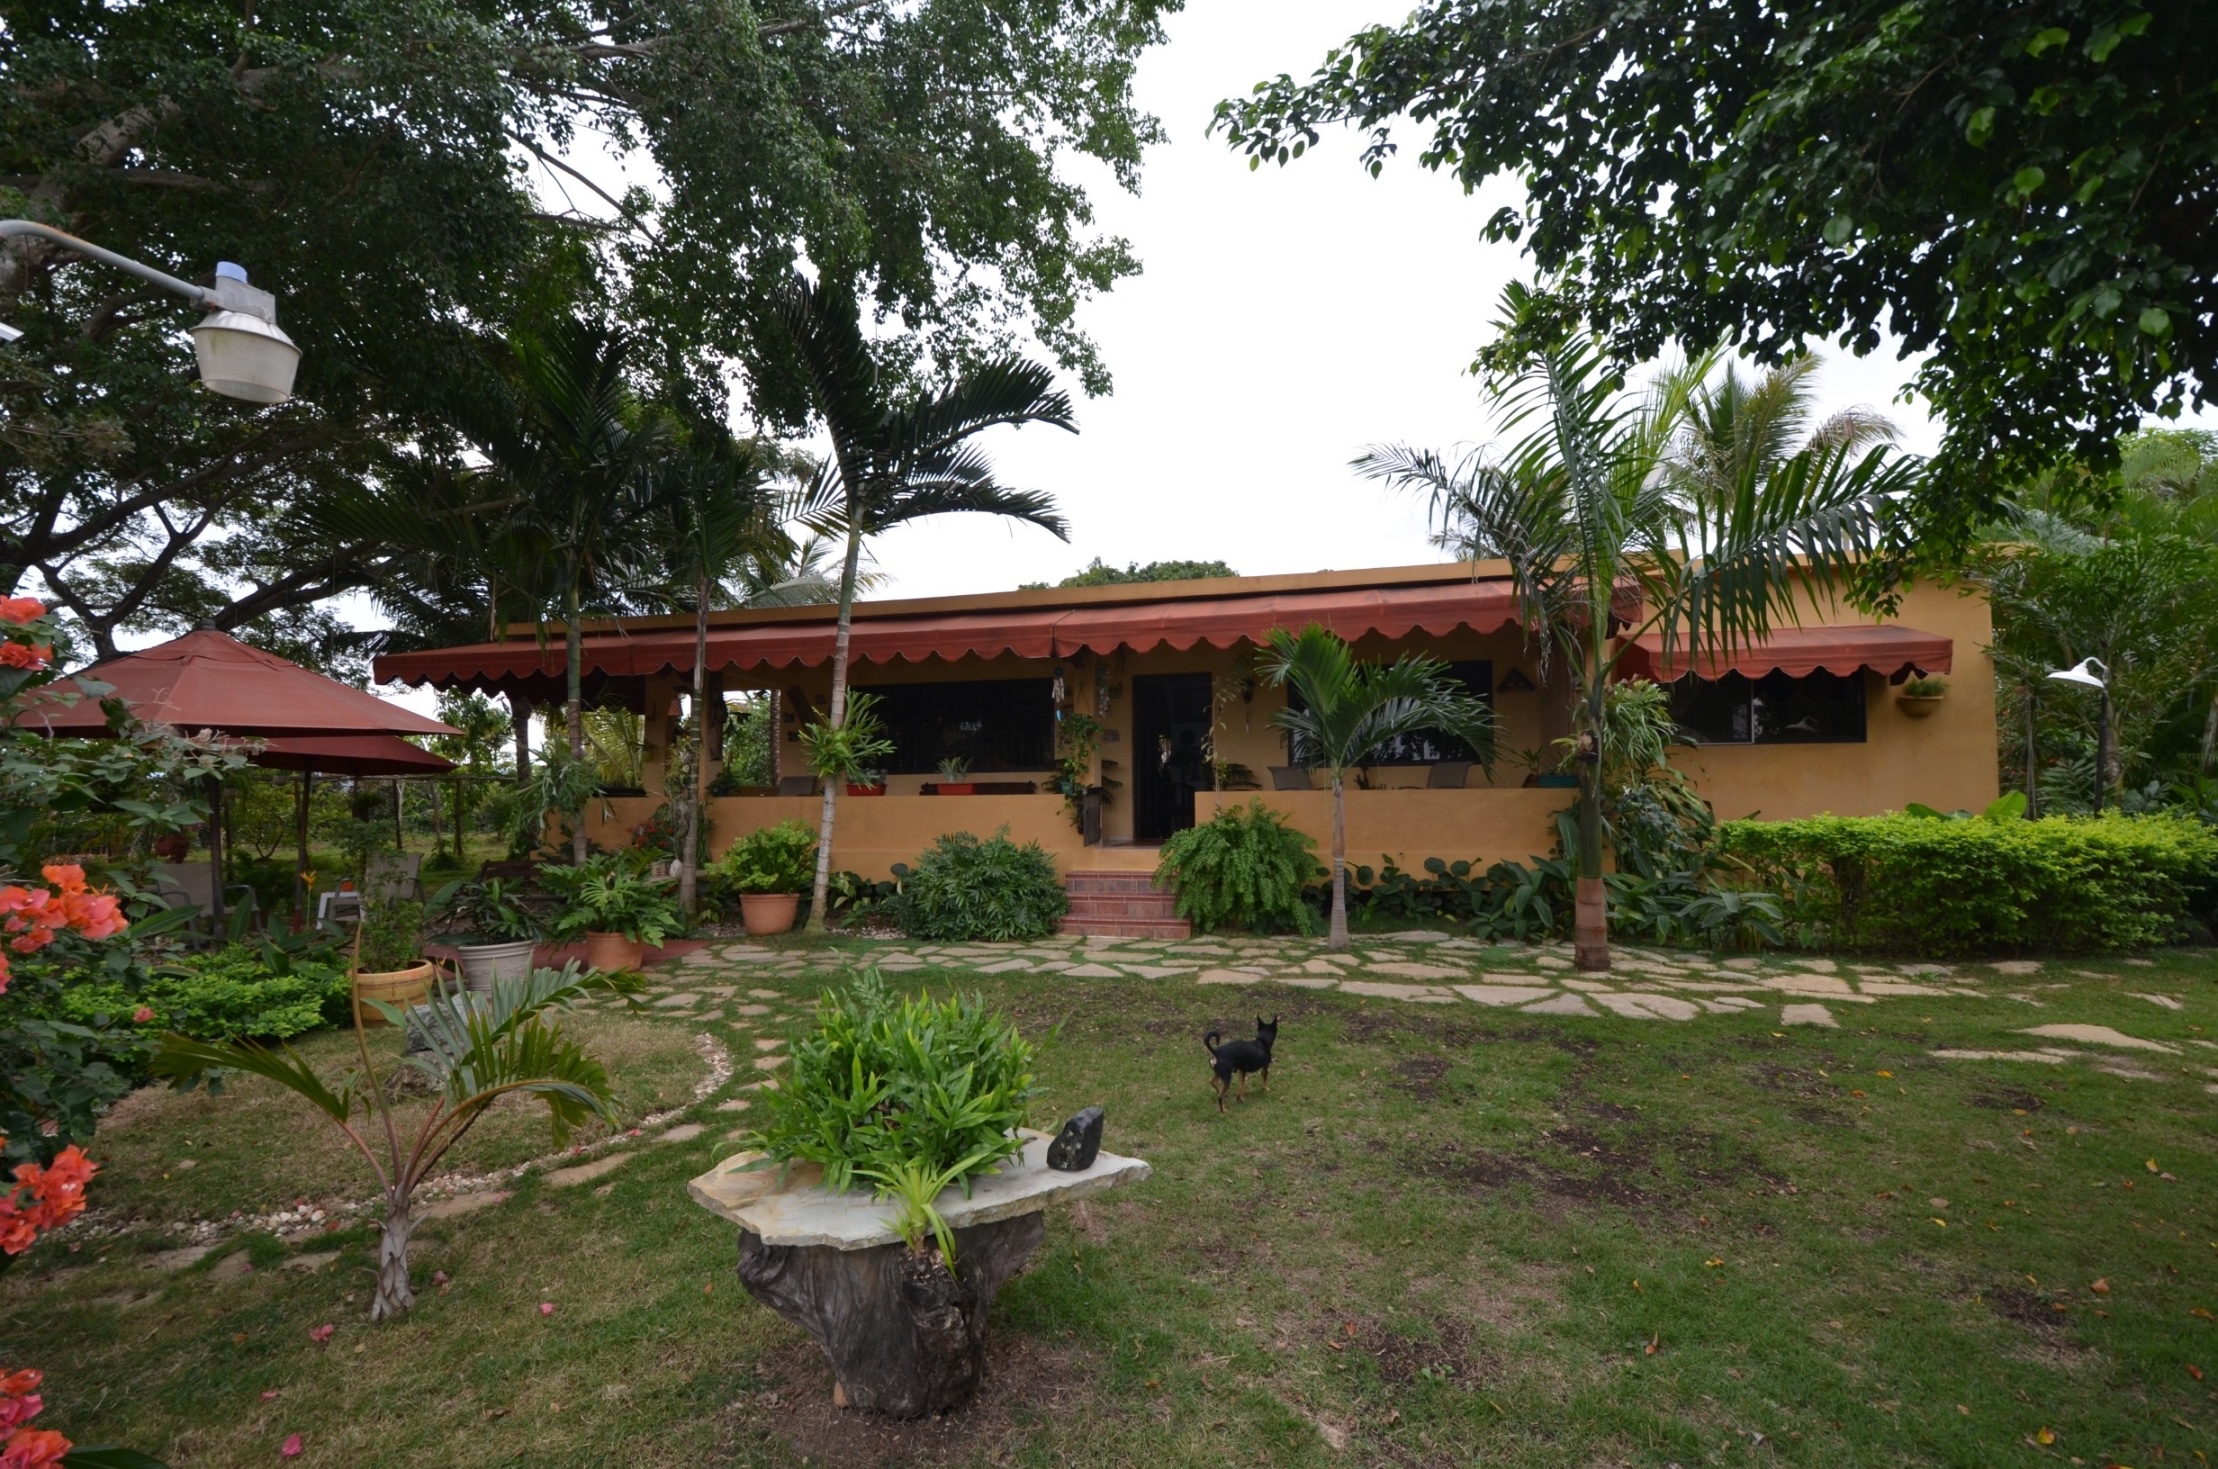 3 Bedroom Country Side House For Sale in Puerto Plata